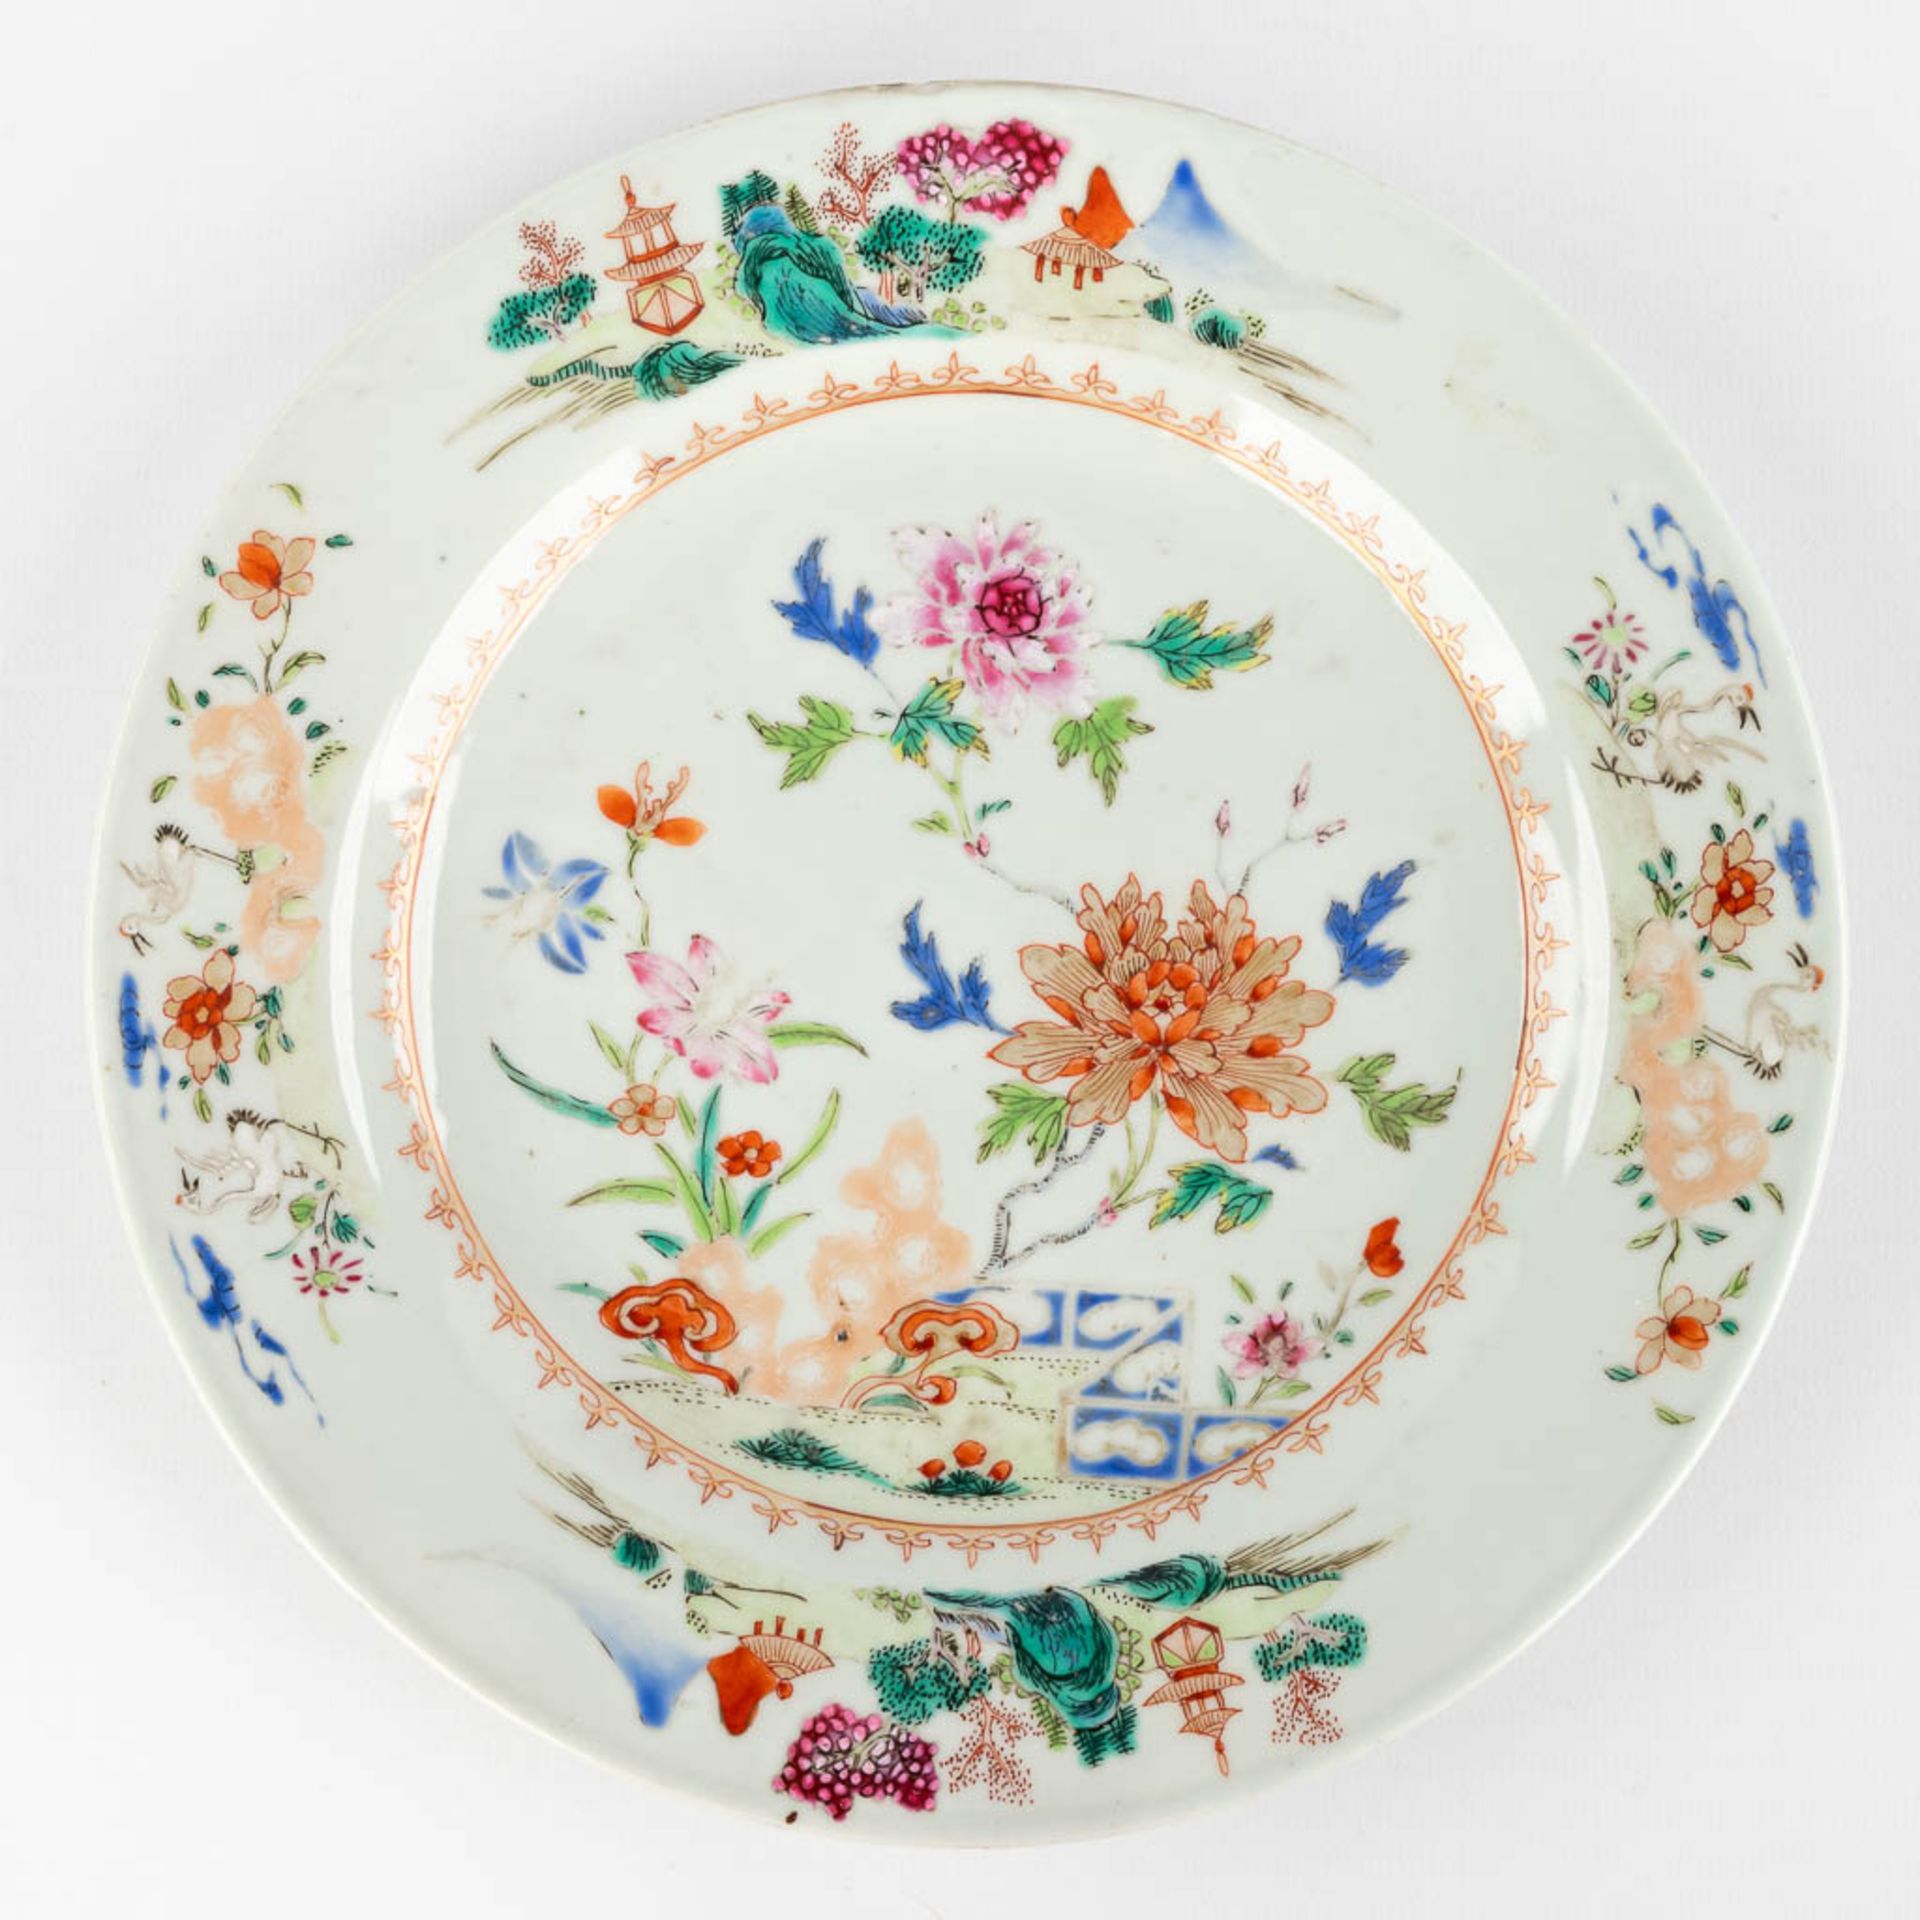 Three Chinese Famille Rose plates with a floral decor. 19th C. (D:22,5 cm) - Image 8 of 11